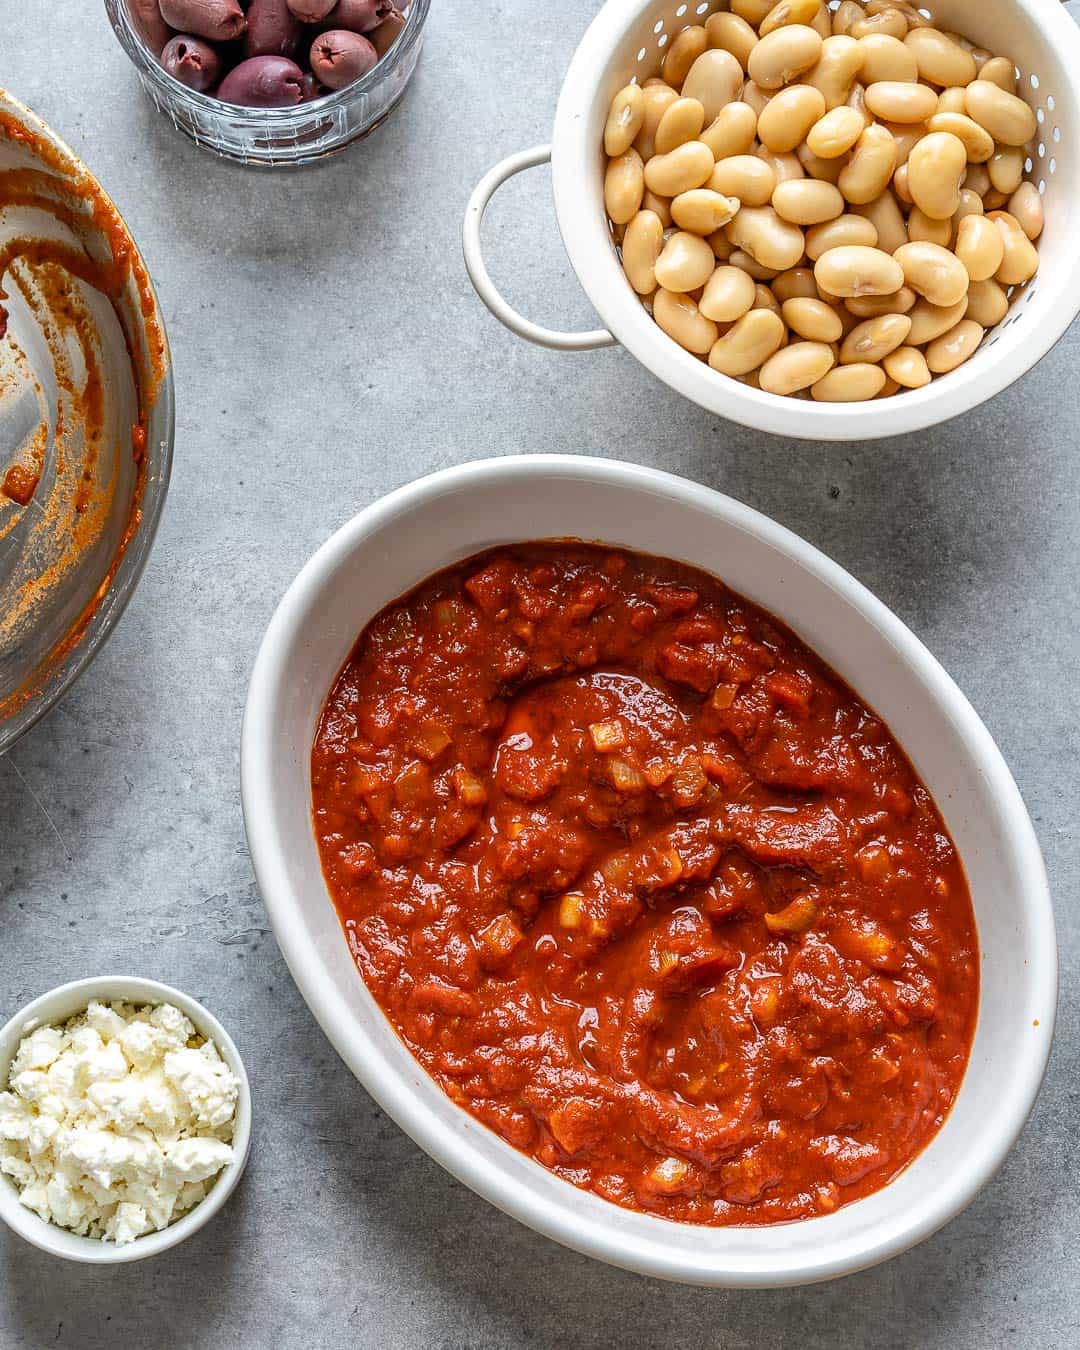 Make the sauce for the baked beans